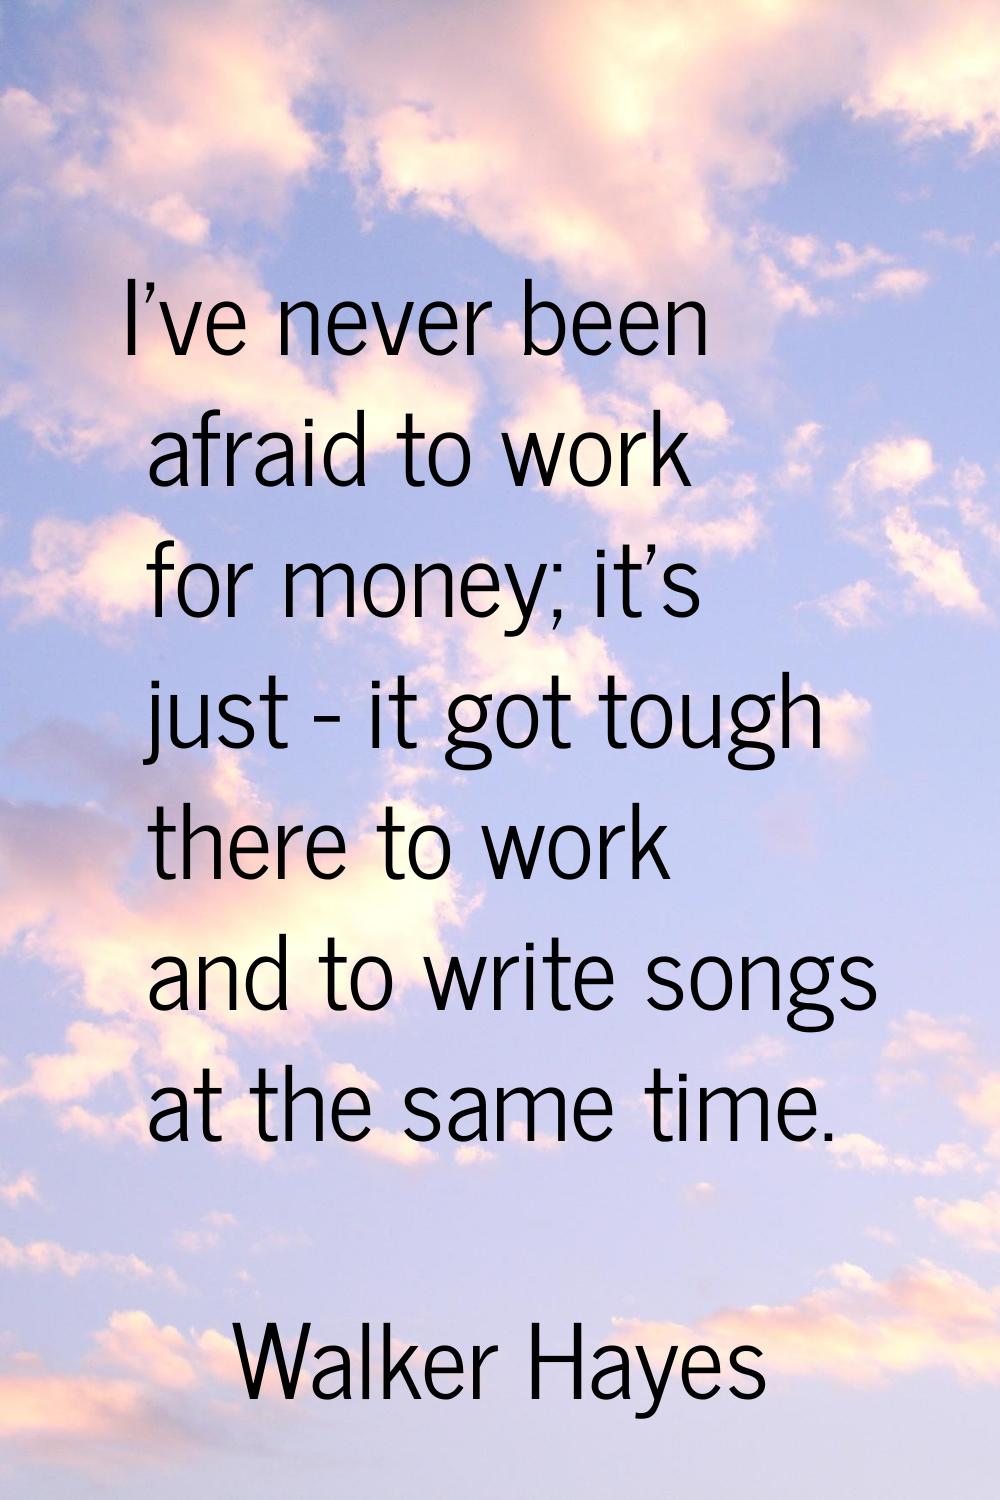 I've never been afraid to work for money; it's just - it got tough there to work and to write songs